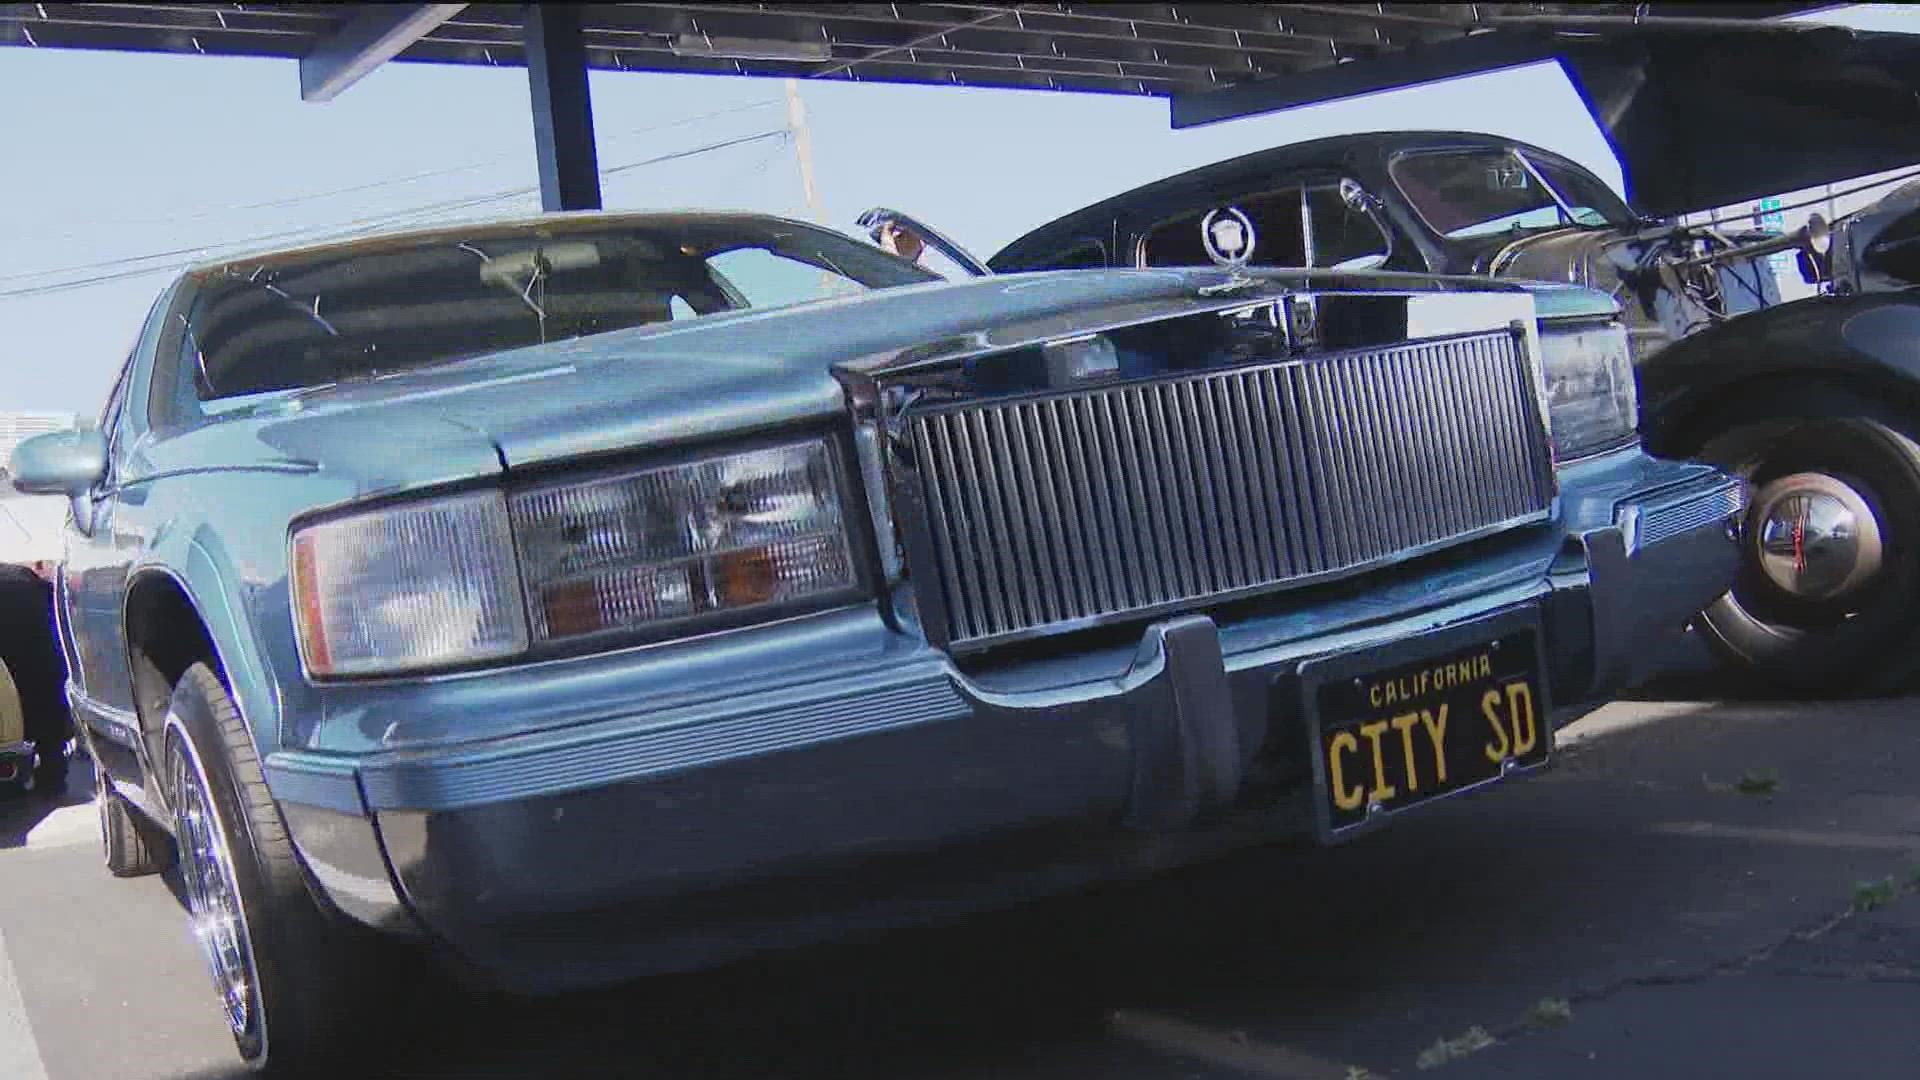 Lowriders say it's a pilot program and after the trial period, the city will determine the events and whether to lift the ordinance.